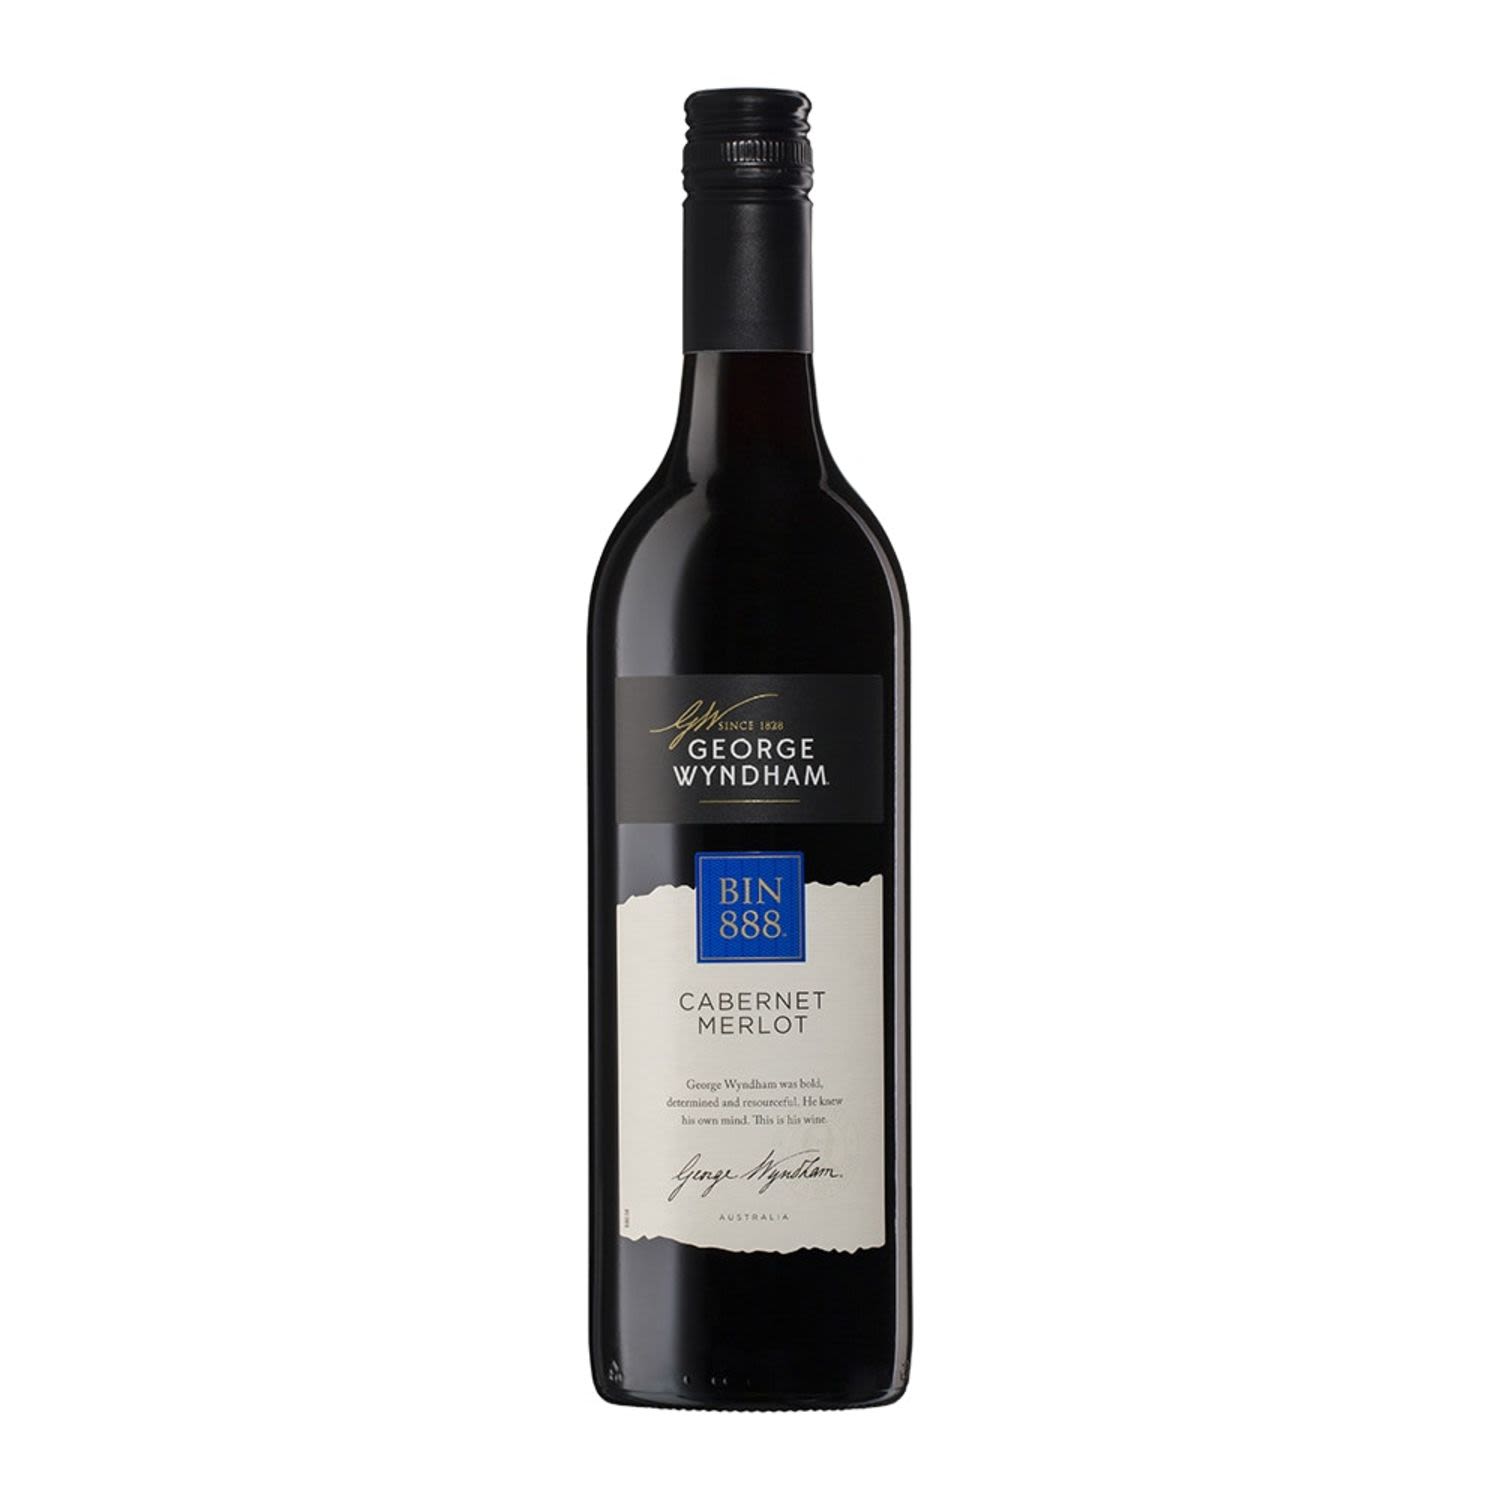 George Wyndham Bin 888 Cabernet Merlot is the perfect blend of Cabernet Sauvignon & Merlot from vineyards dotted around NSW. It shows cassis & cedary oak, a mix of red & blue berries with savoury, fine-grained tannins.<br /> <br />Alcohol Volume: 13.80%<br /><br />Pack Format: Bottle<br /><br />Standard Drinks: 8.2</br /><br />Pack Type: Bottle<br /><br />Country of Origin: Australia<br /><br />Region: n/a<br /><br />Vintage: Vintages Vary<br />